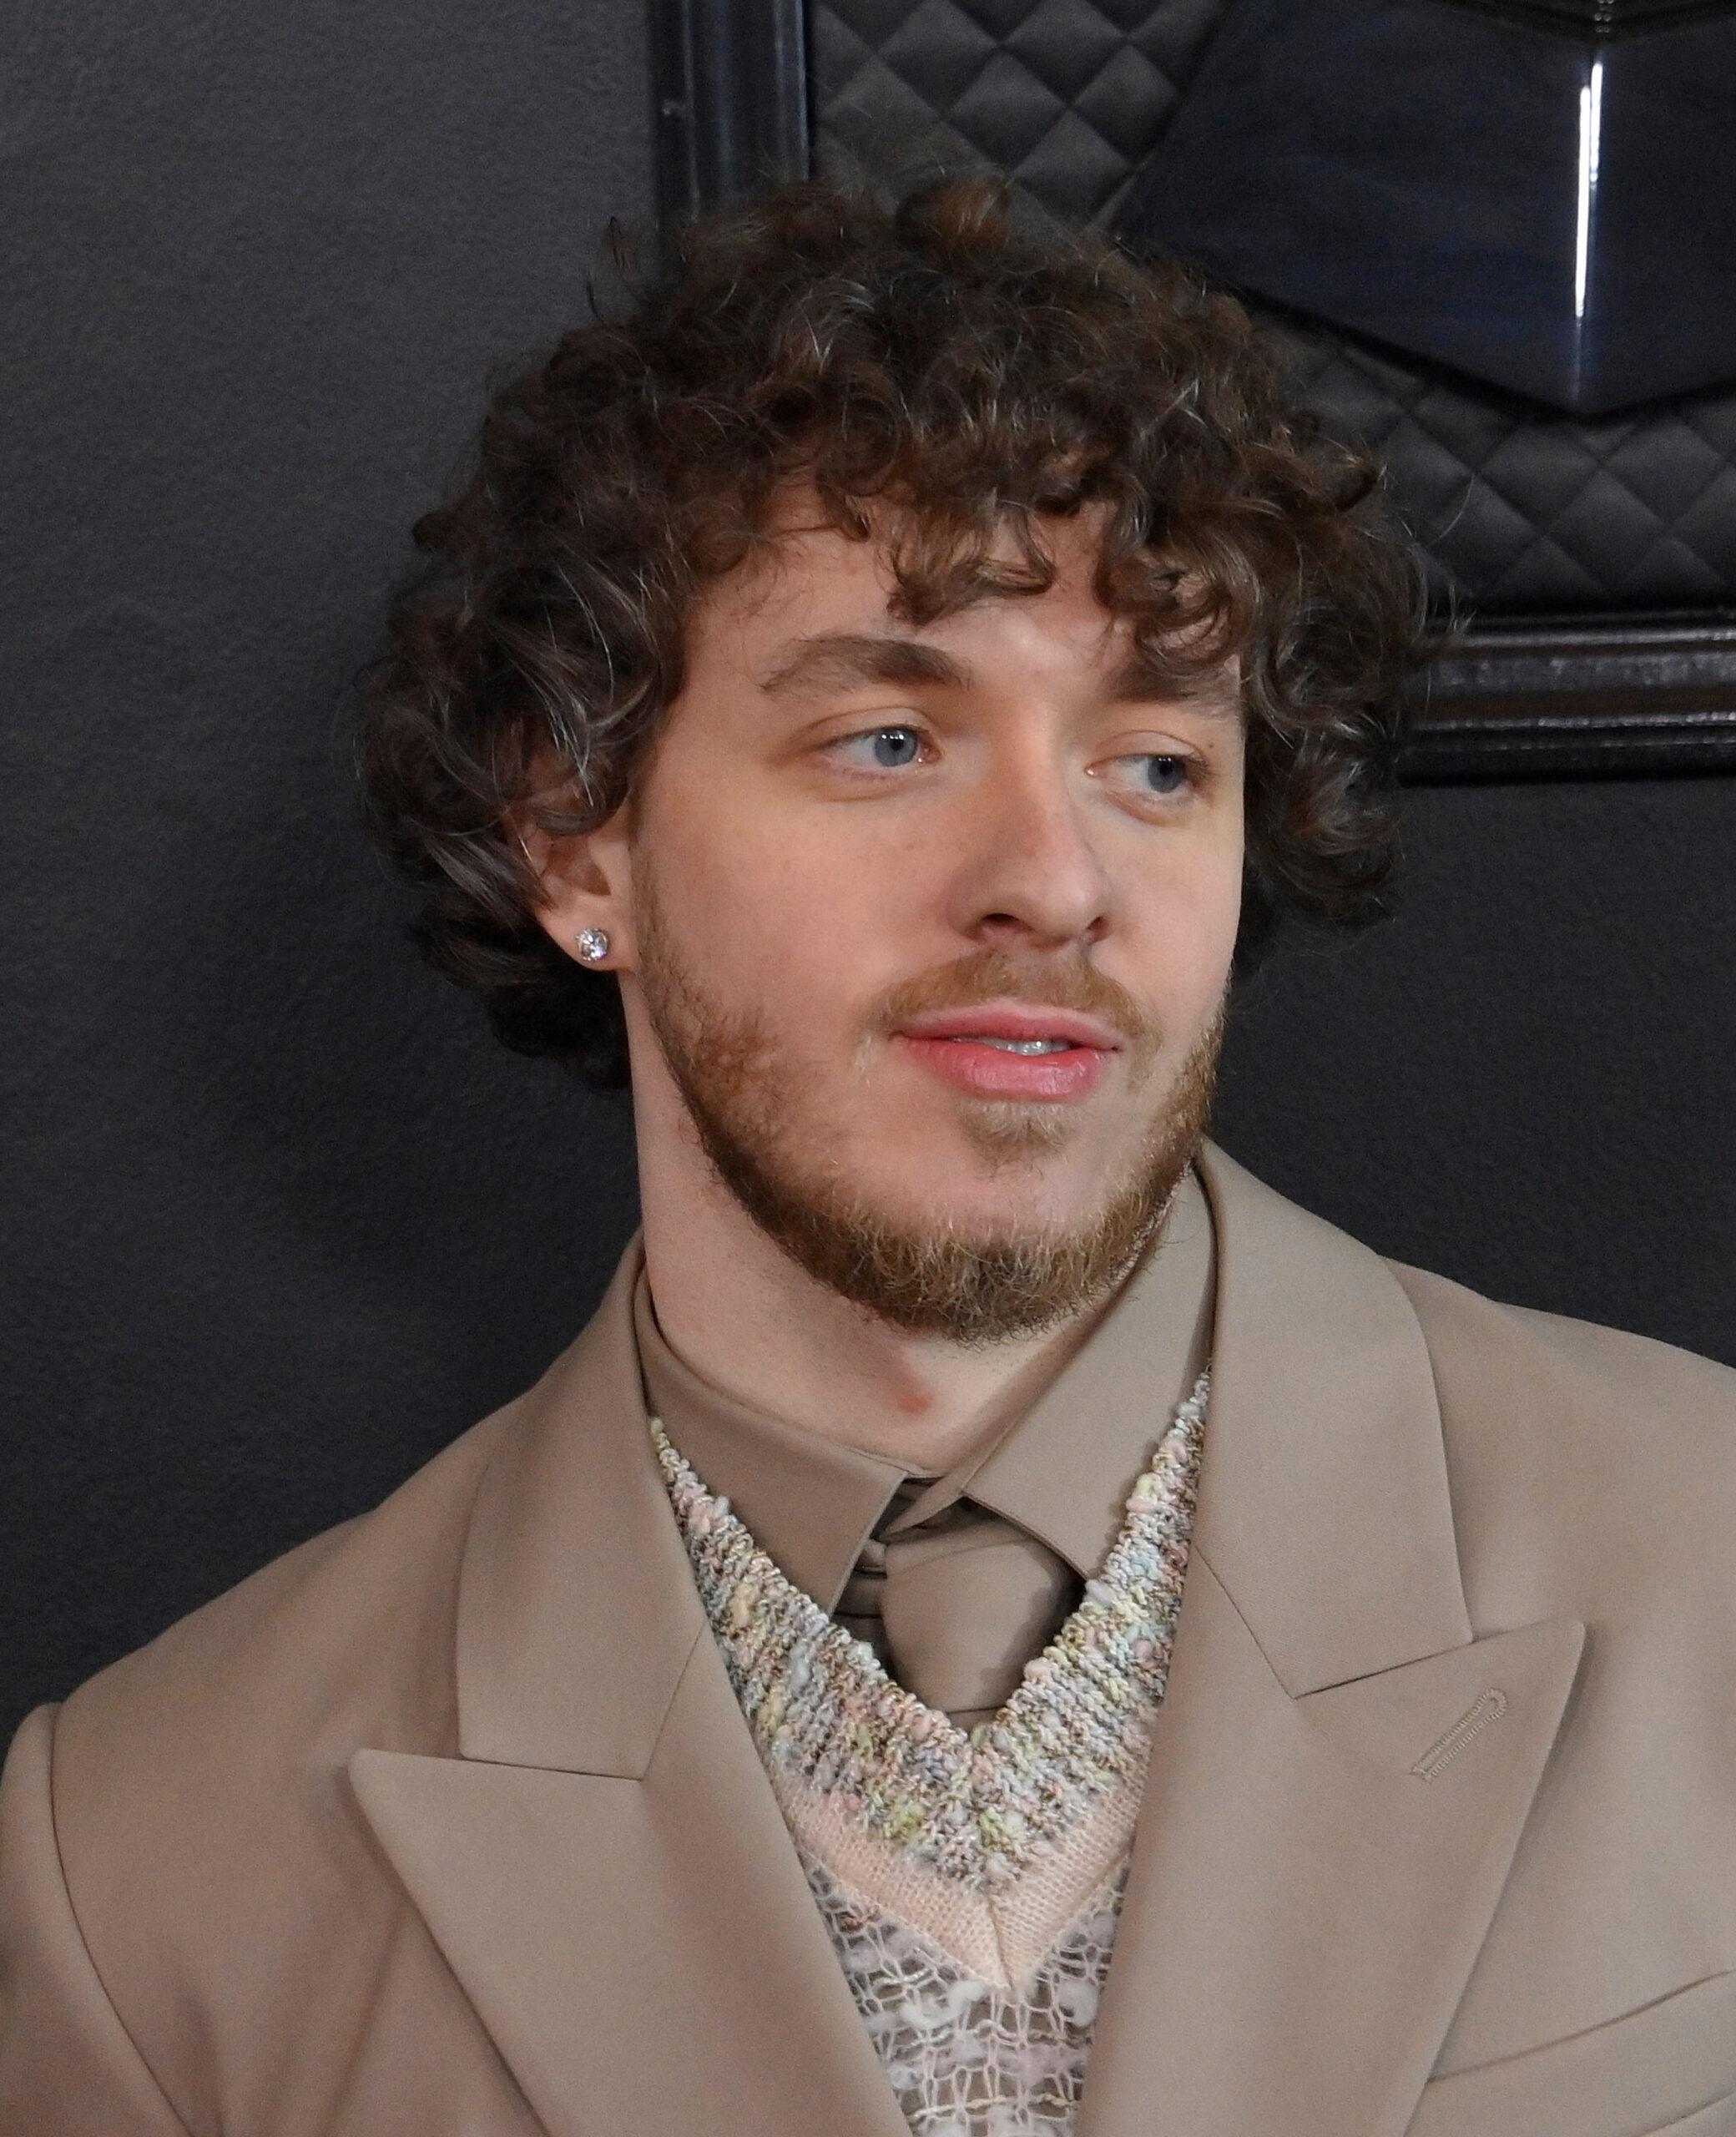 Jack Harlow Attends the 65th Grammy Awards in Los Angeles